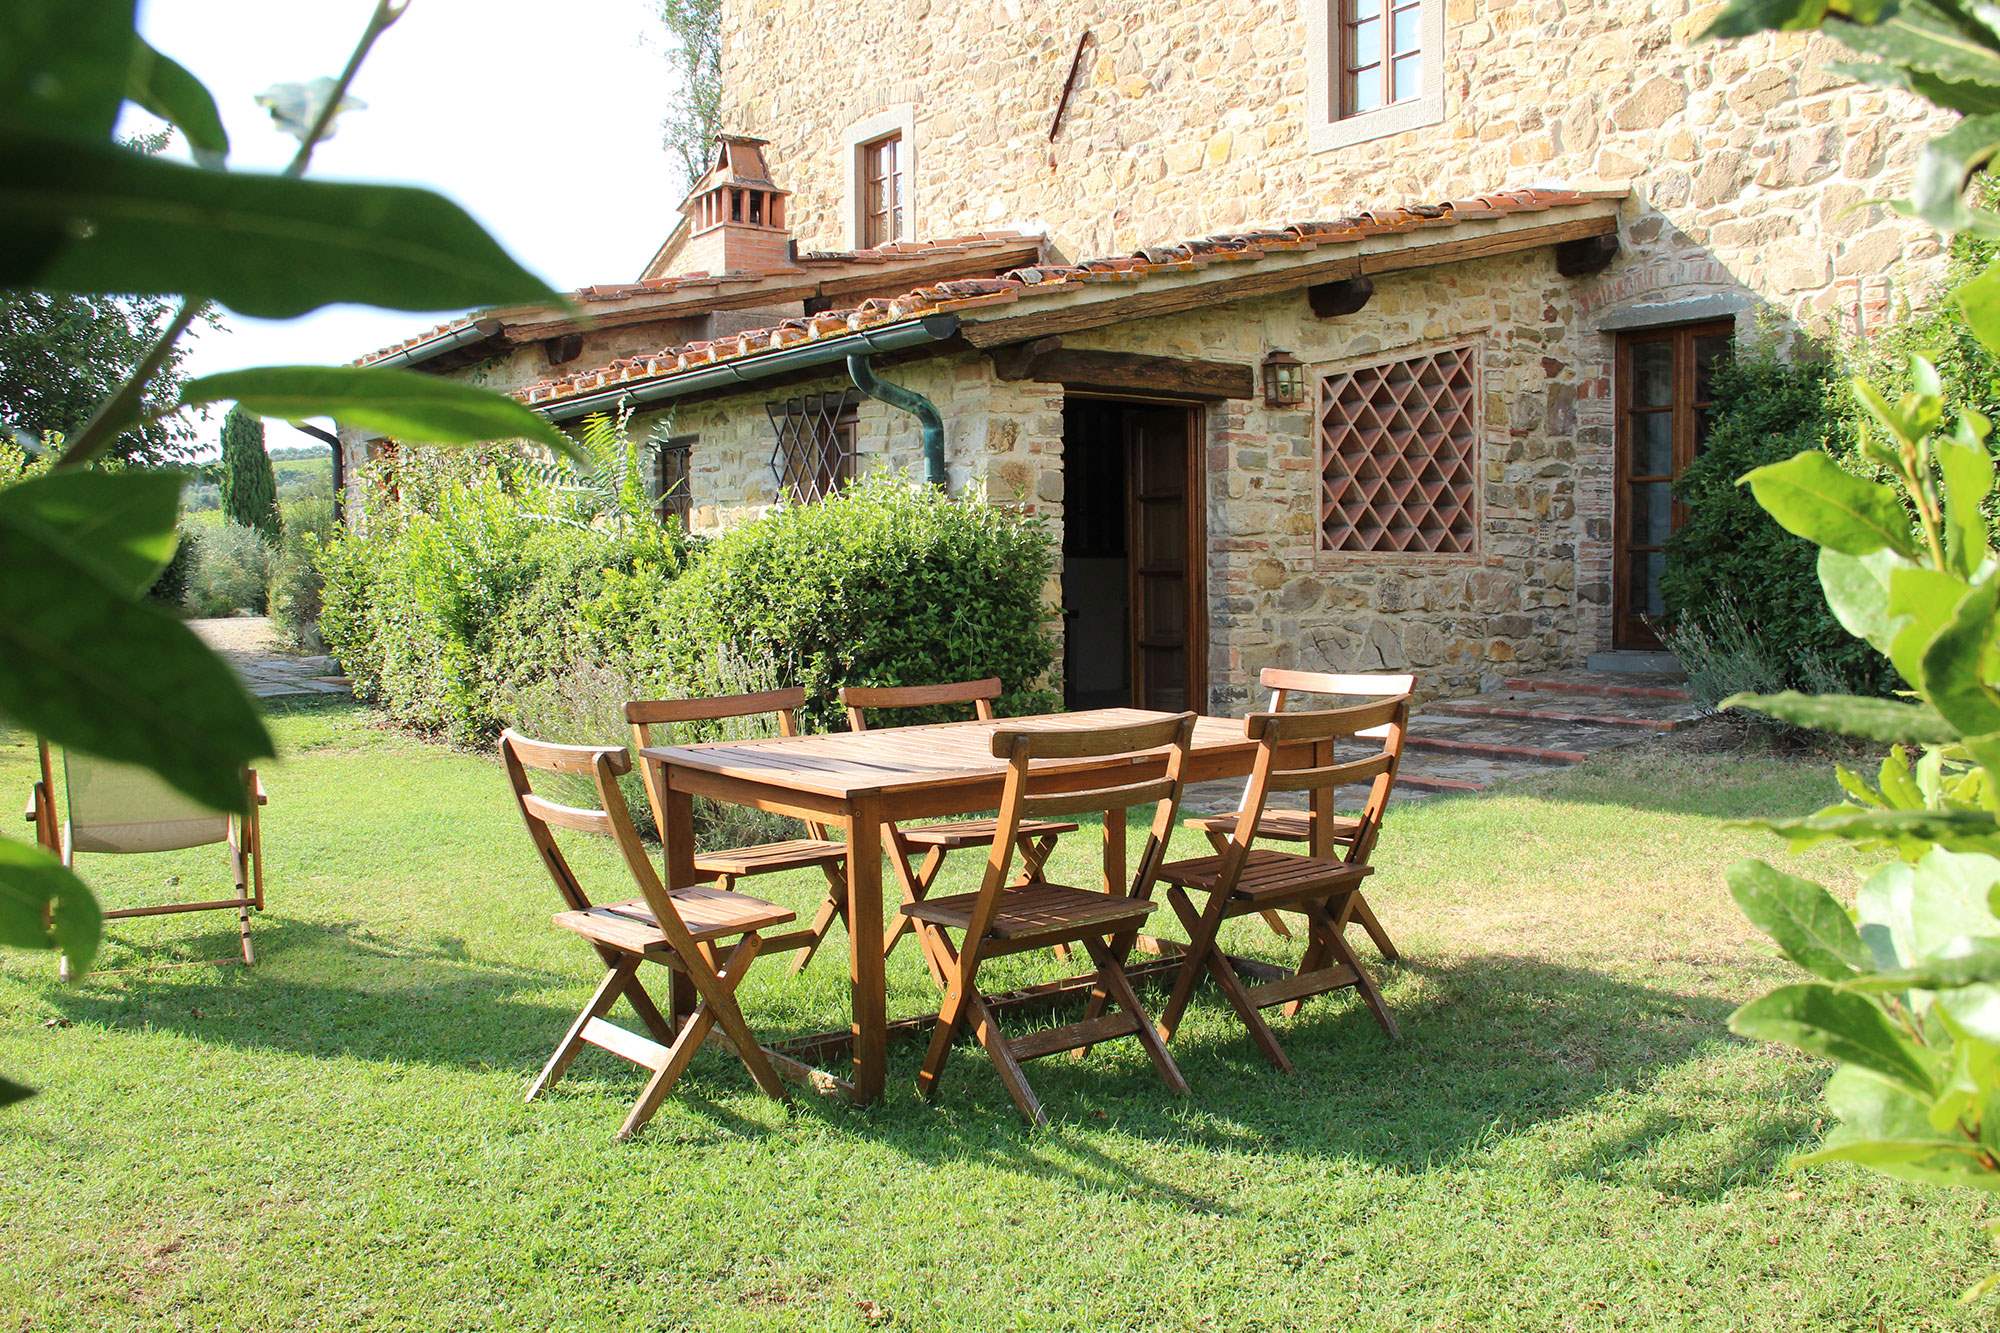 Apartment Vigna, 3 bedroom apartment in Chianti & Countryside, Tuscany Photo #1